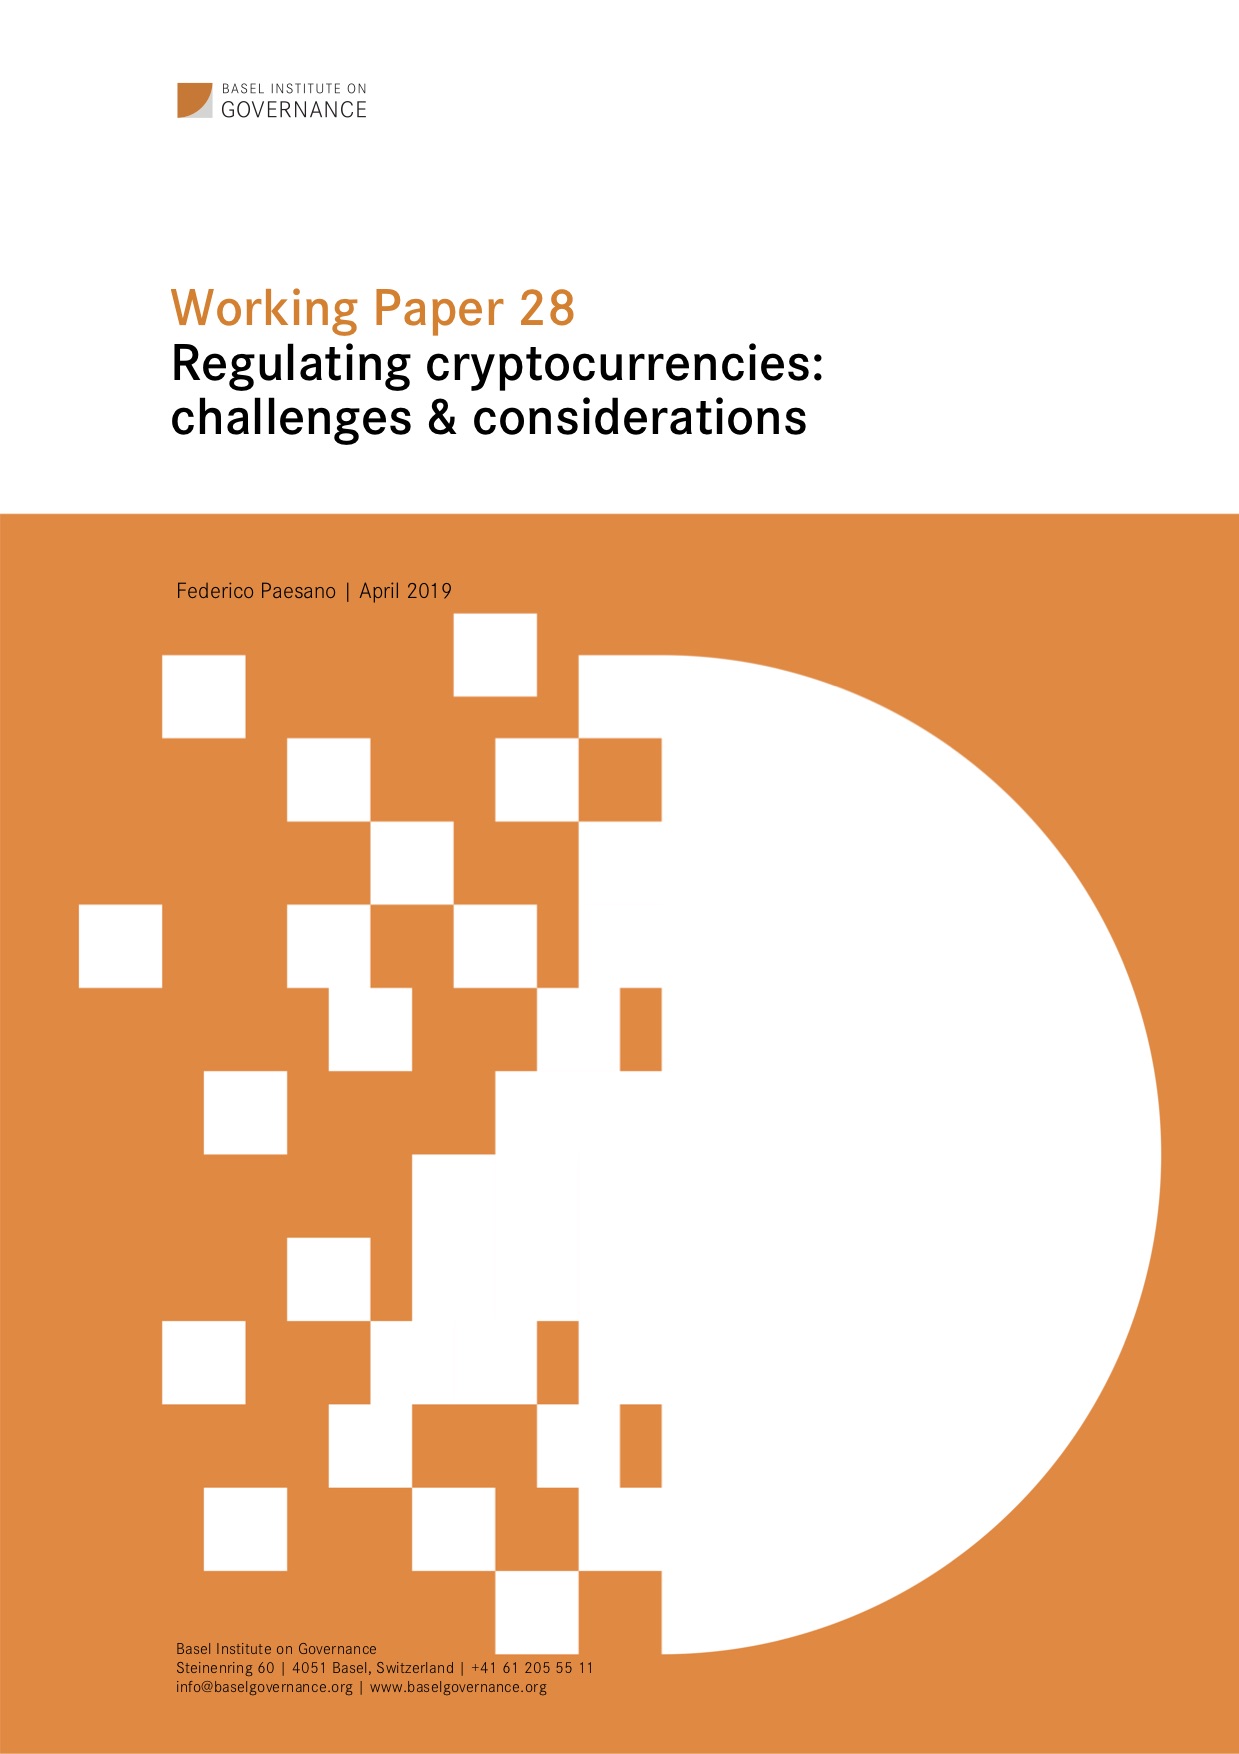 Working Paper 28 Regulating cryptocurrencies: challenges & considerations